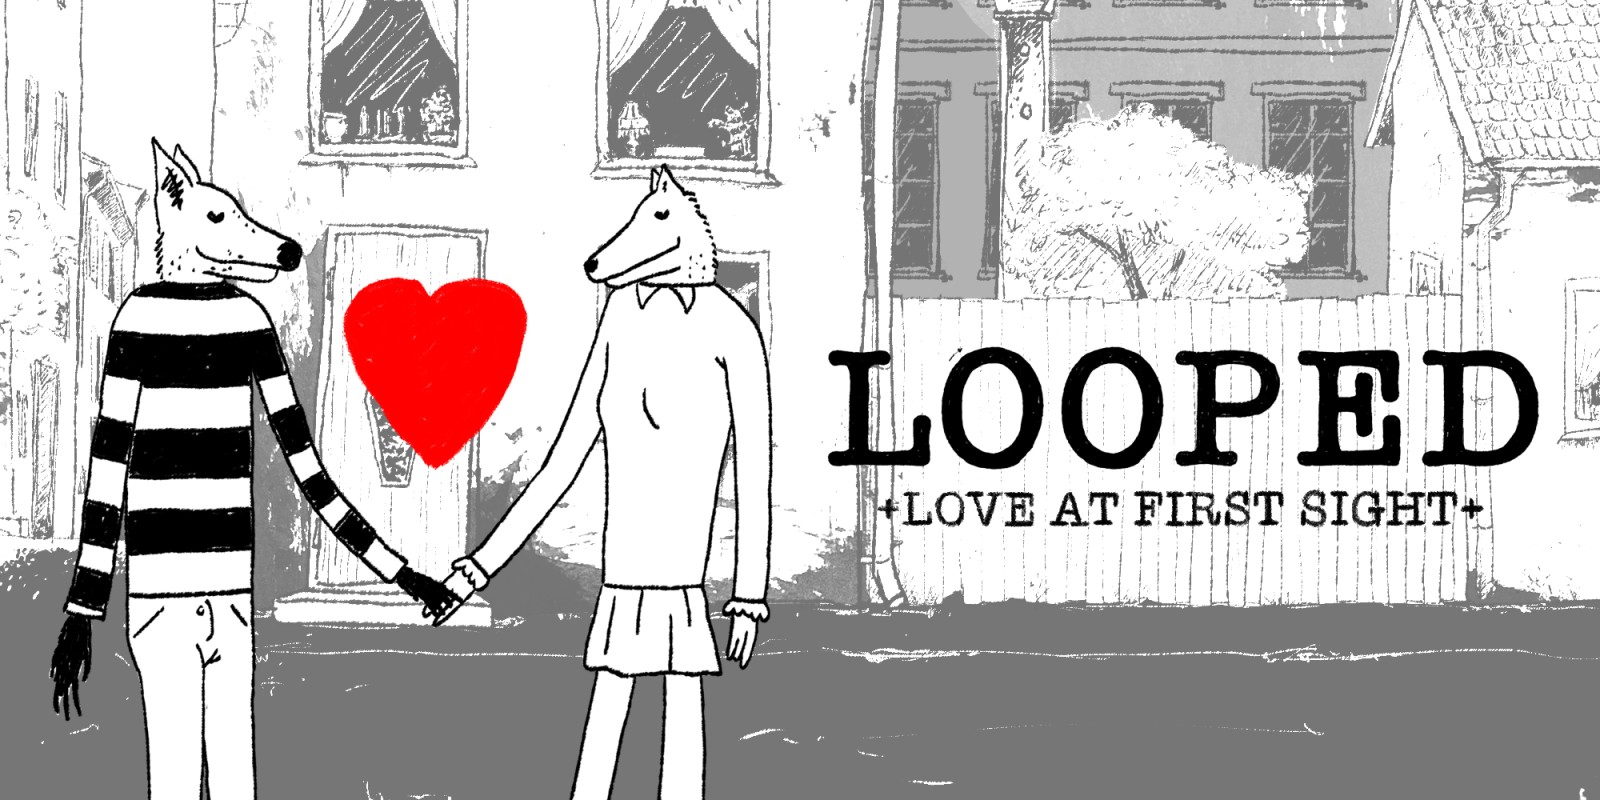 Looped: Love at first sight